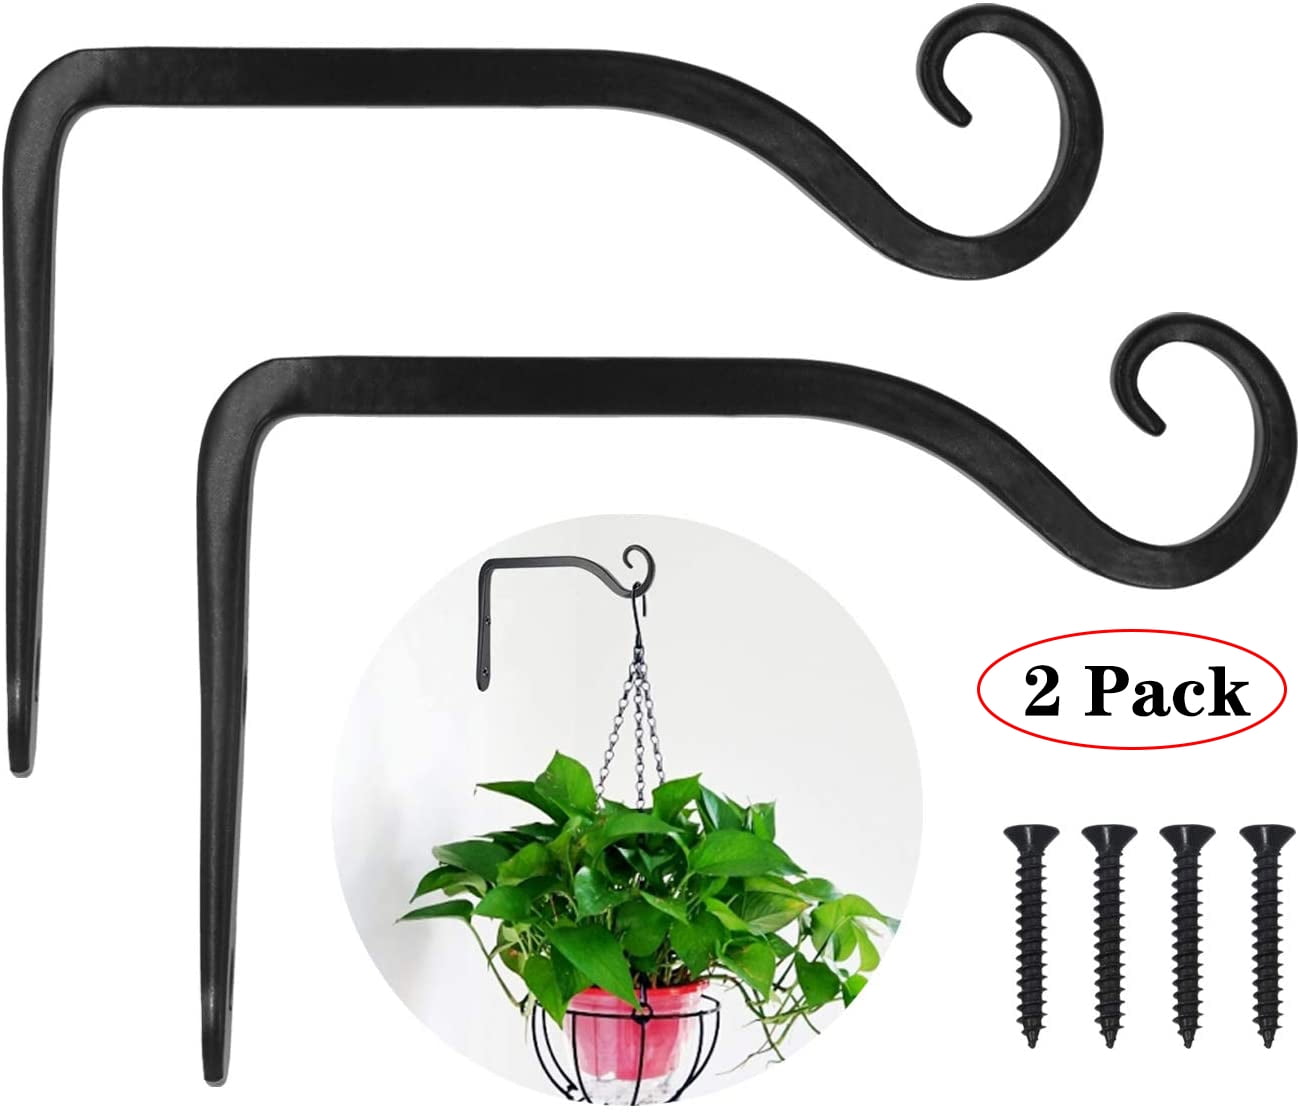 Miracliy Cup Hook Ceiling Hooks Vinyl Coated Screw Hanger for Hanging Plants Mugs Kitchen Utensils Wind Chimes Indoor and Outdoor Use，2.9 Inches,25 Pack White 